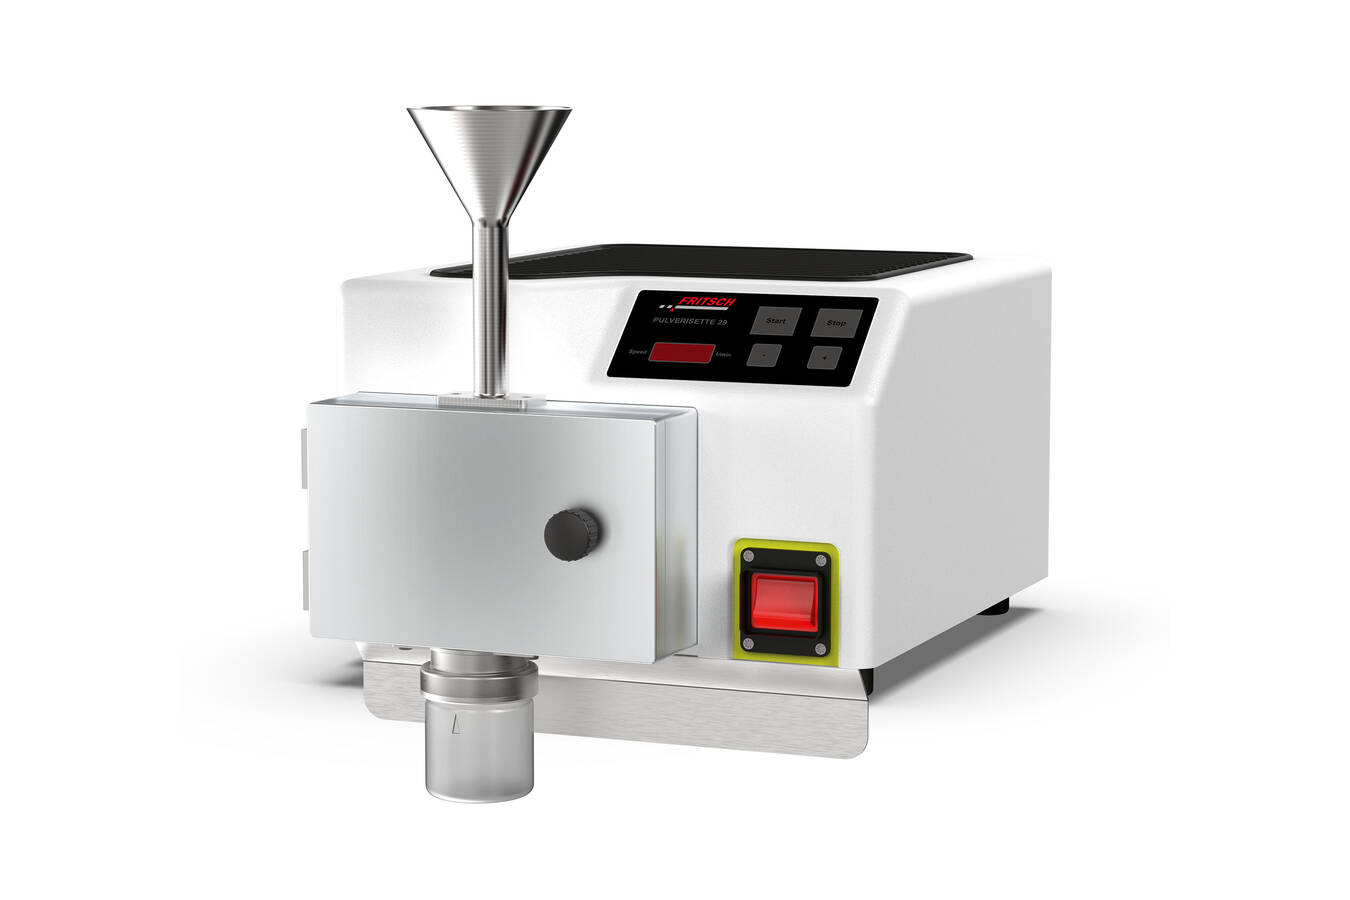 The small professional grinder for versatile use The FRITSCH Mini Cutting Mill PULVERISETTE 29 is the ideal laboratory mill if you regularly grind small sample quantities of materials such as grain, seeds or even plastics and other materials with a low specific density.